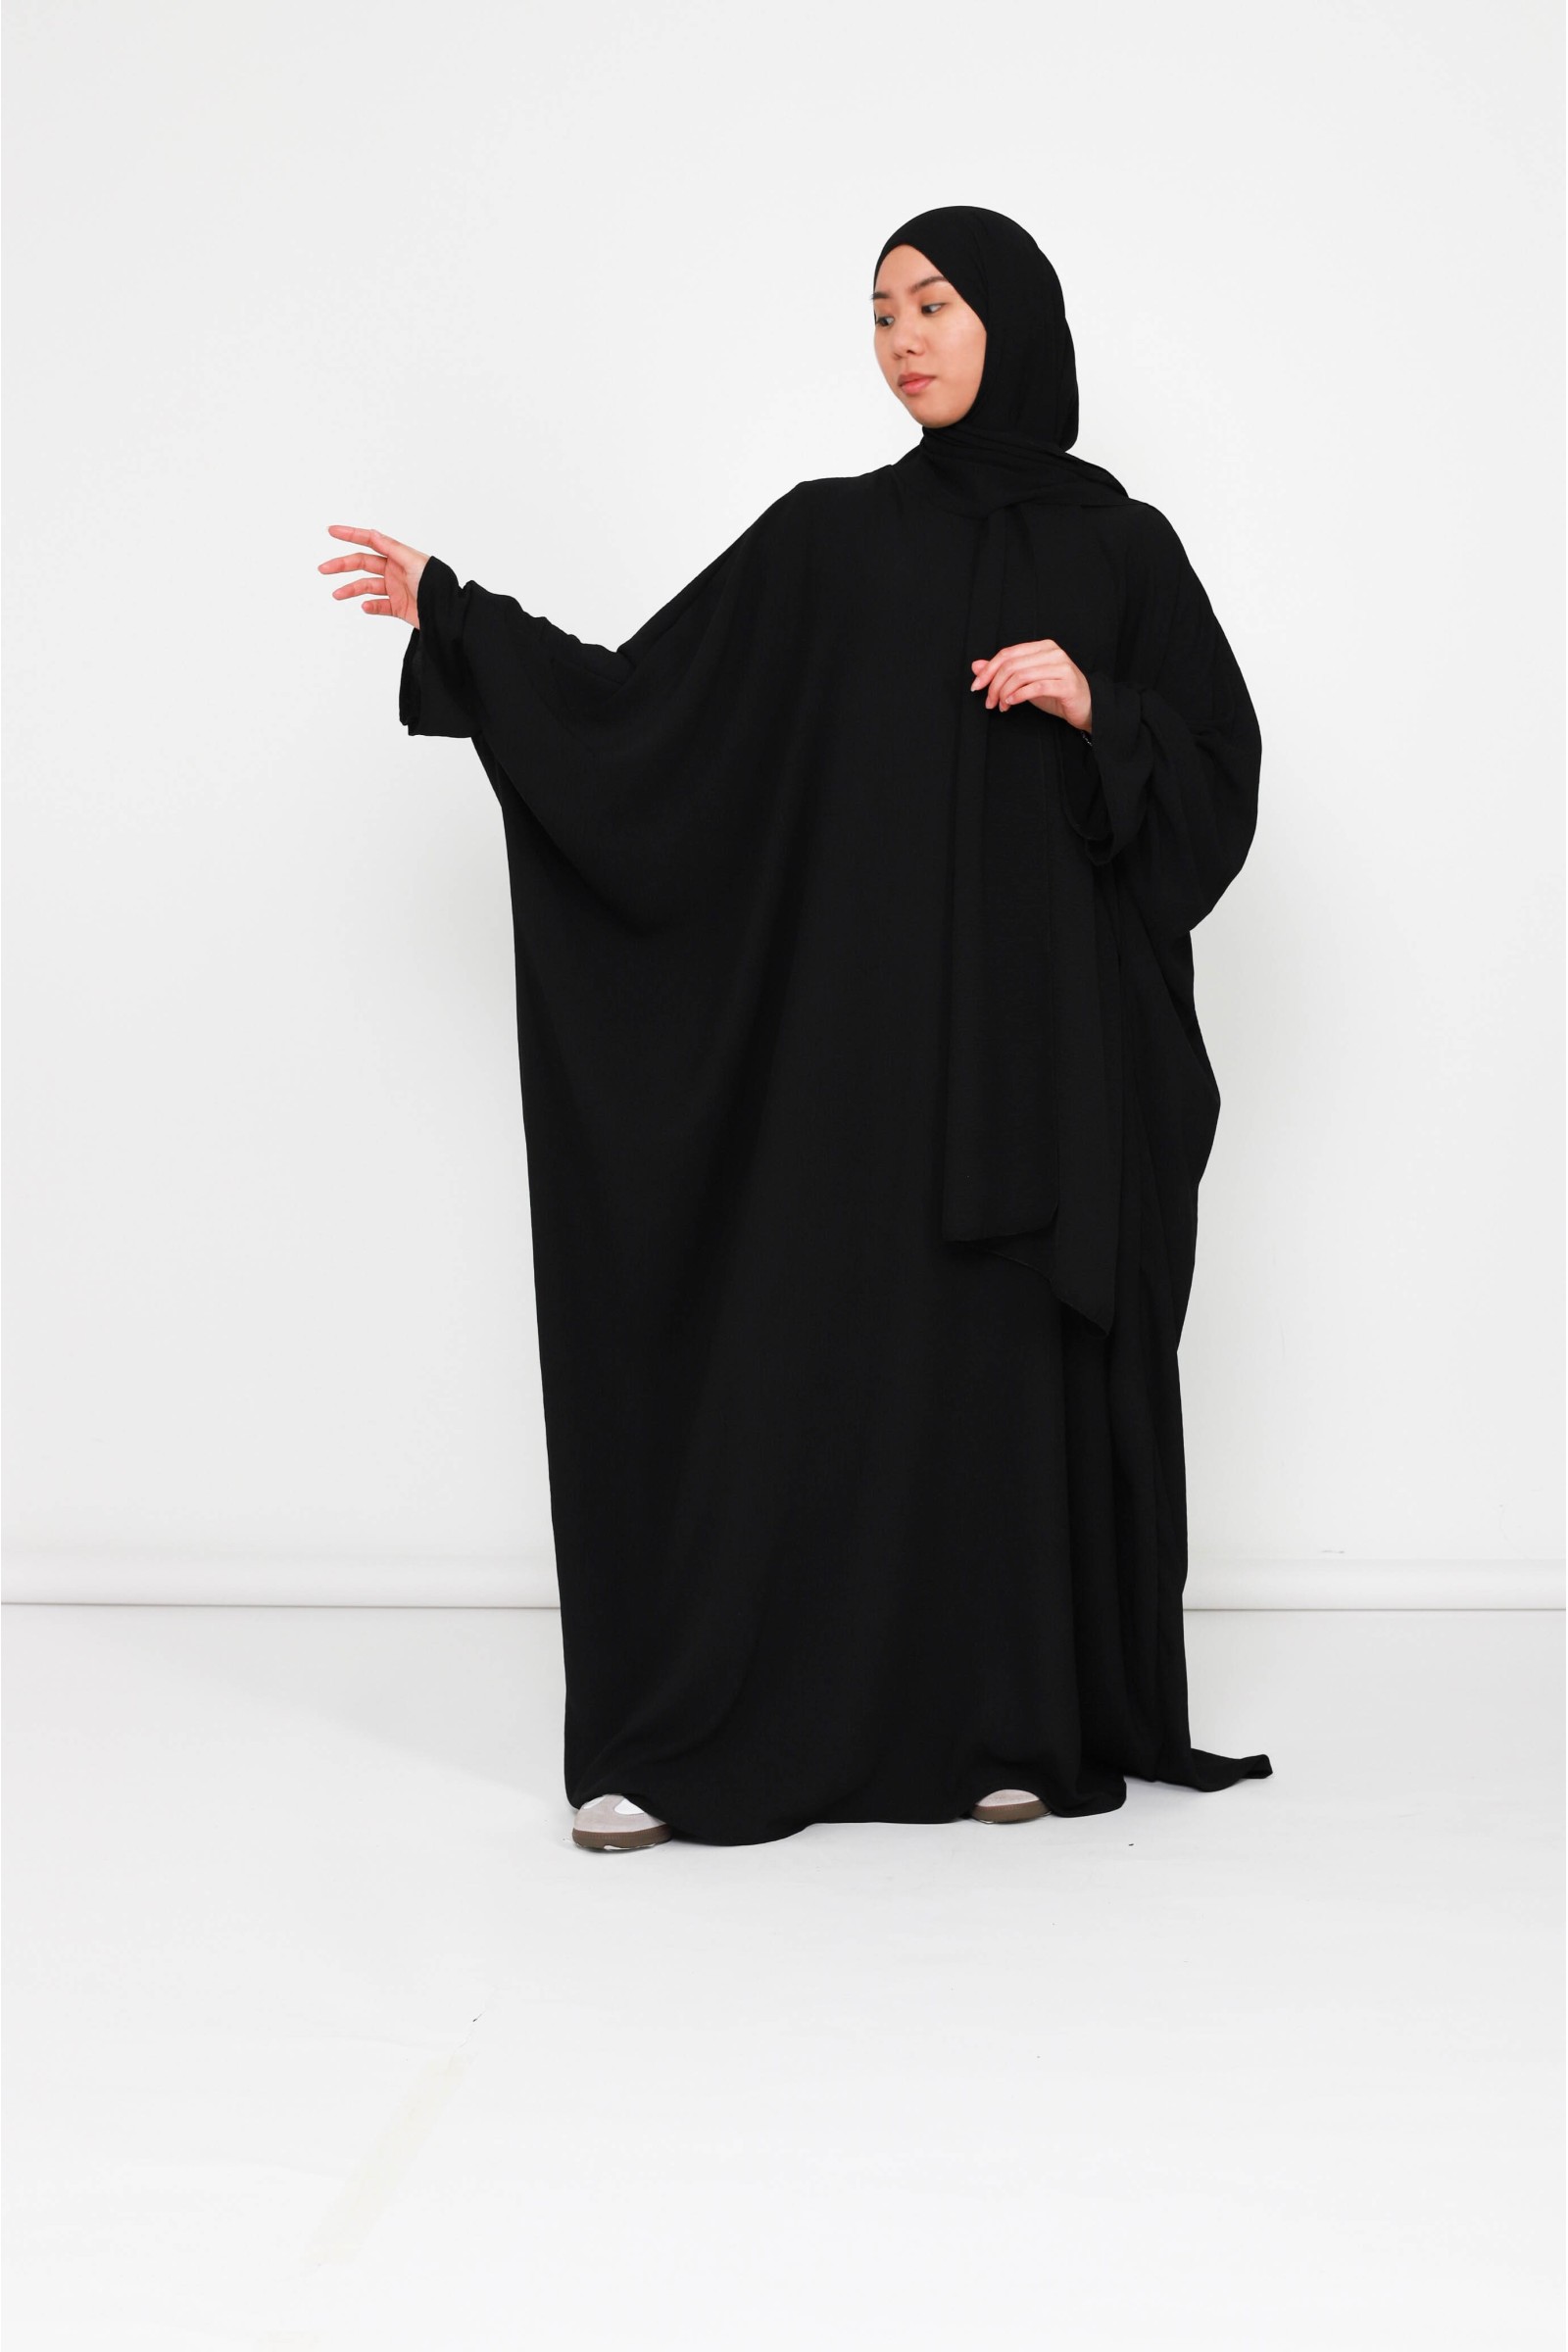 Inexpensive abaya with an integrated veil in practical jazz material